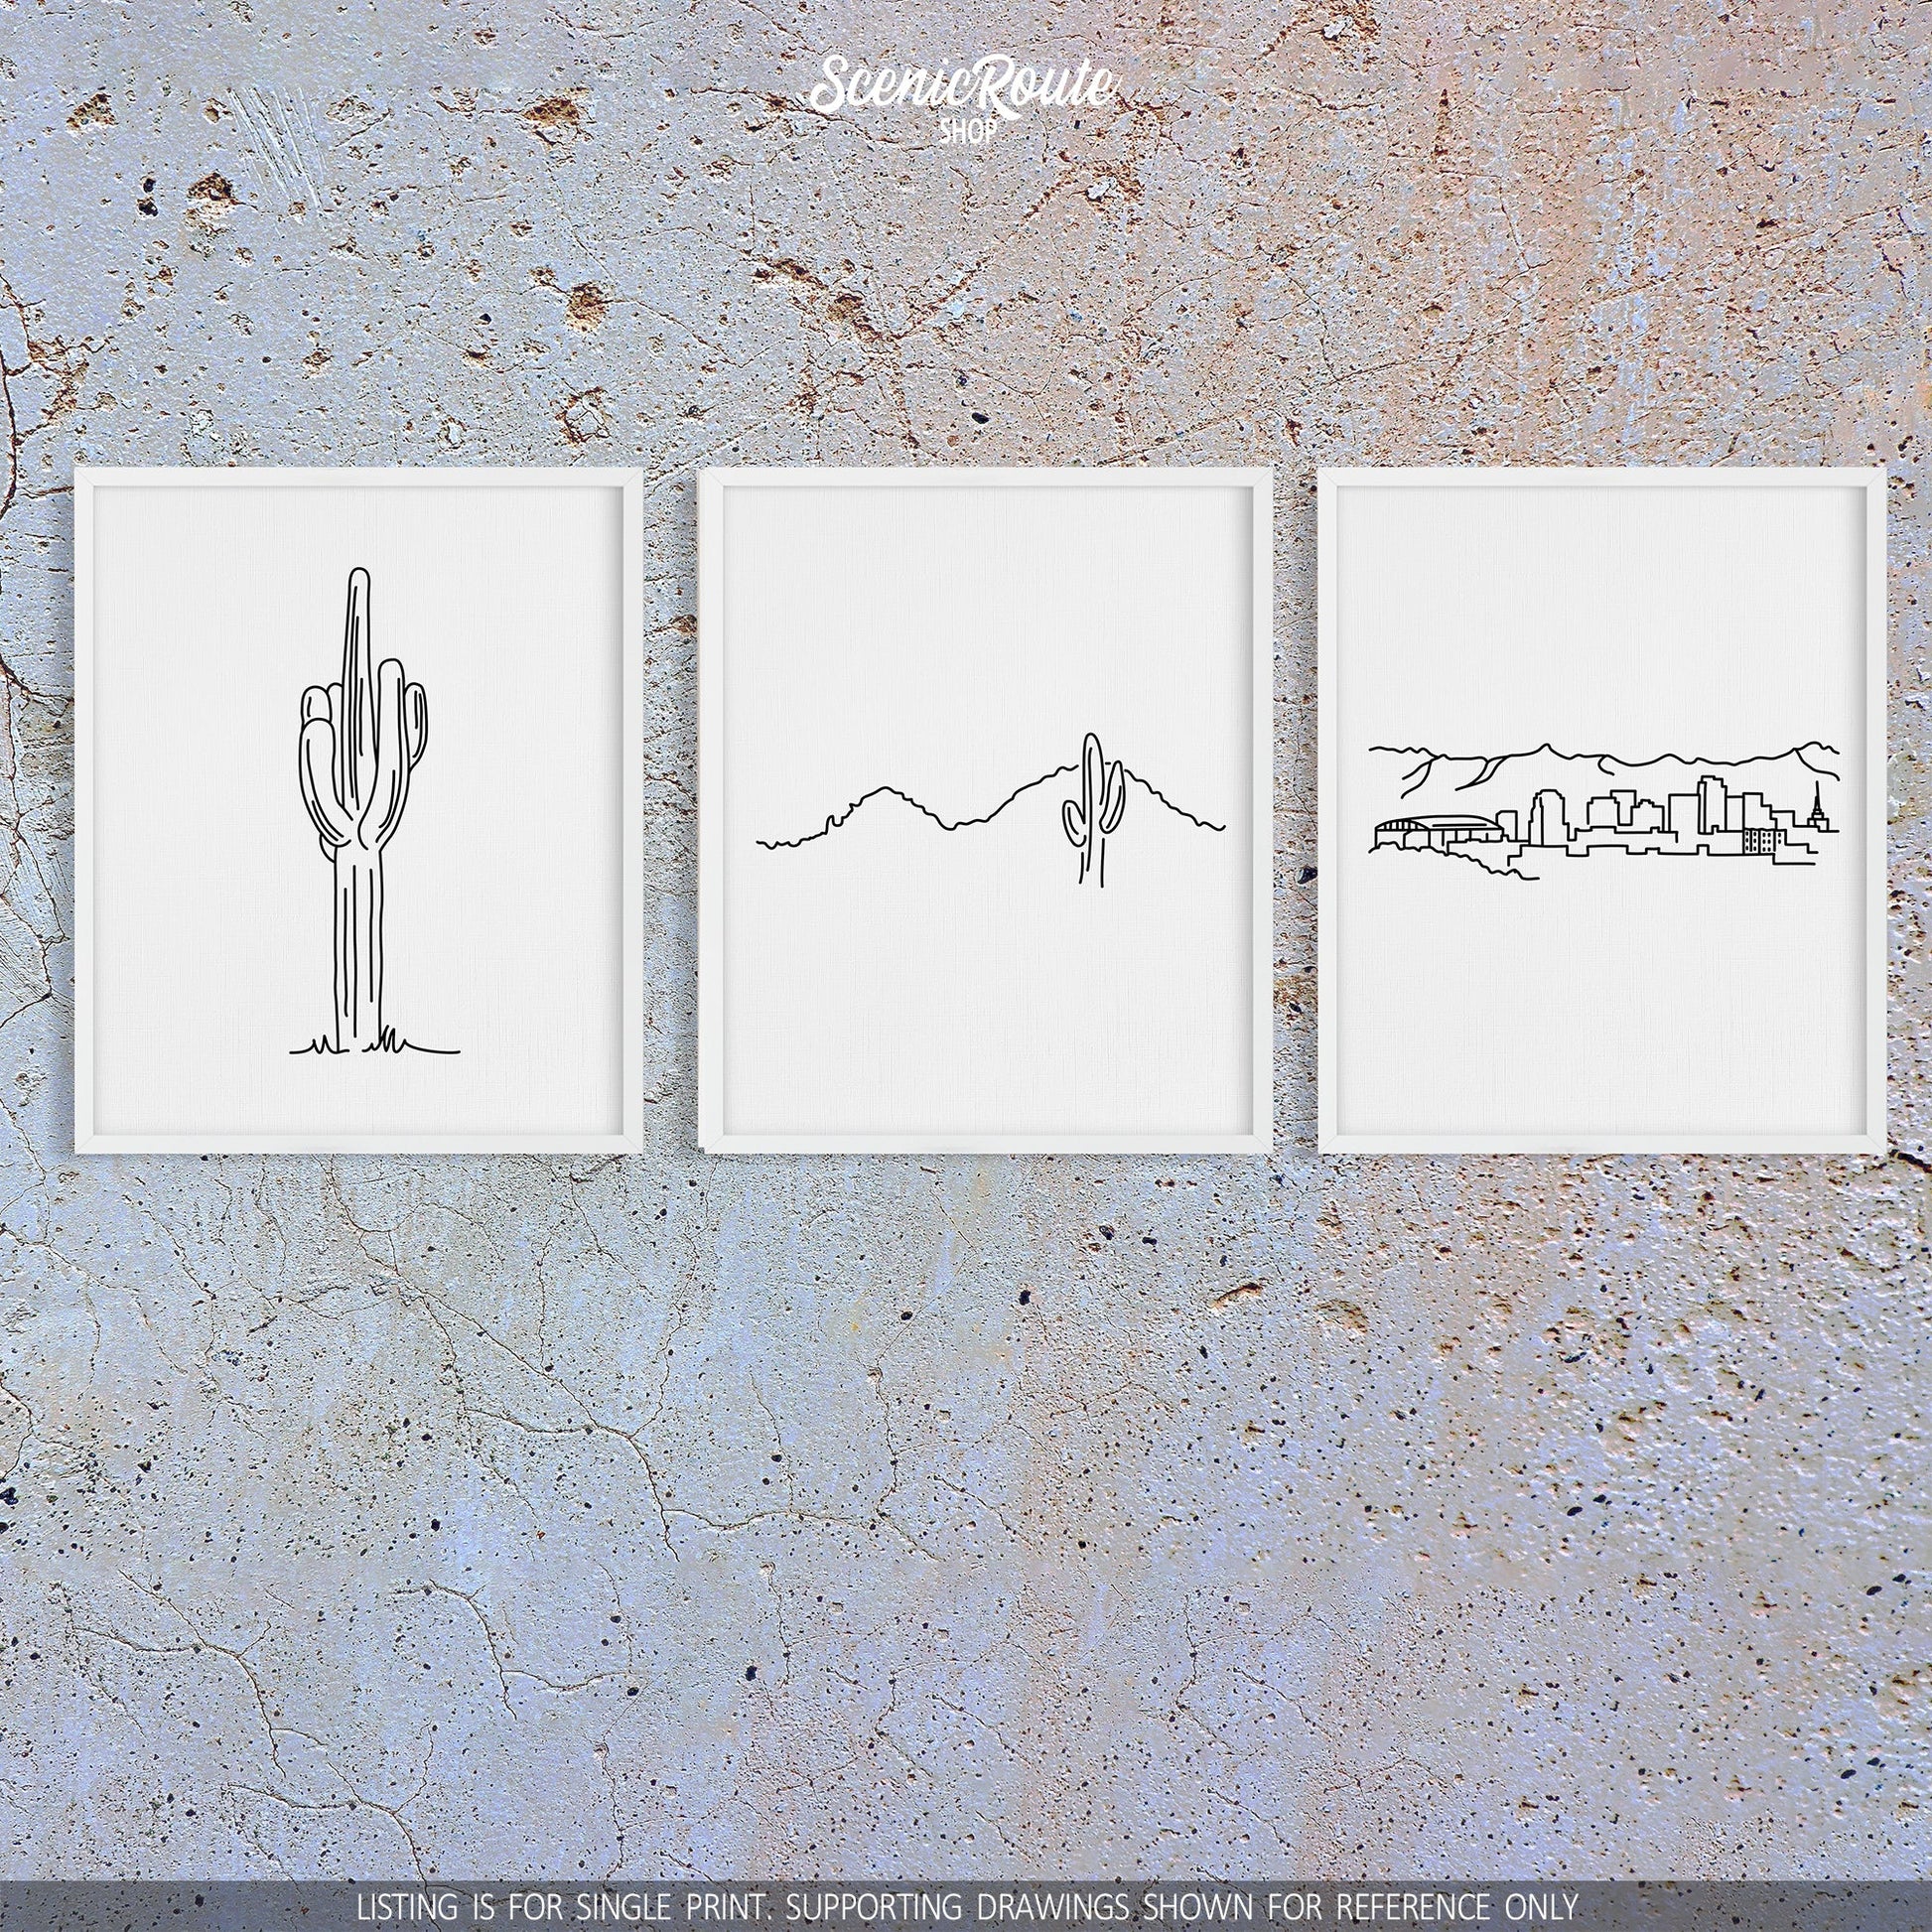 A group of three framed drawings on a concrete wall. The line art drawings include a Saguaro Cactus, Camelback Mountain, and the Phoenix Skyline